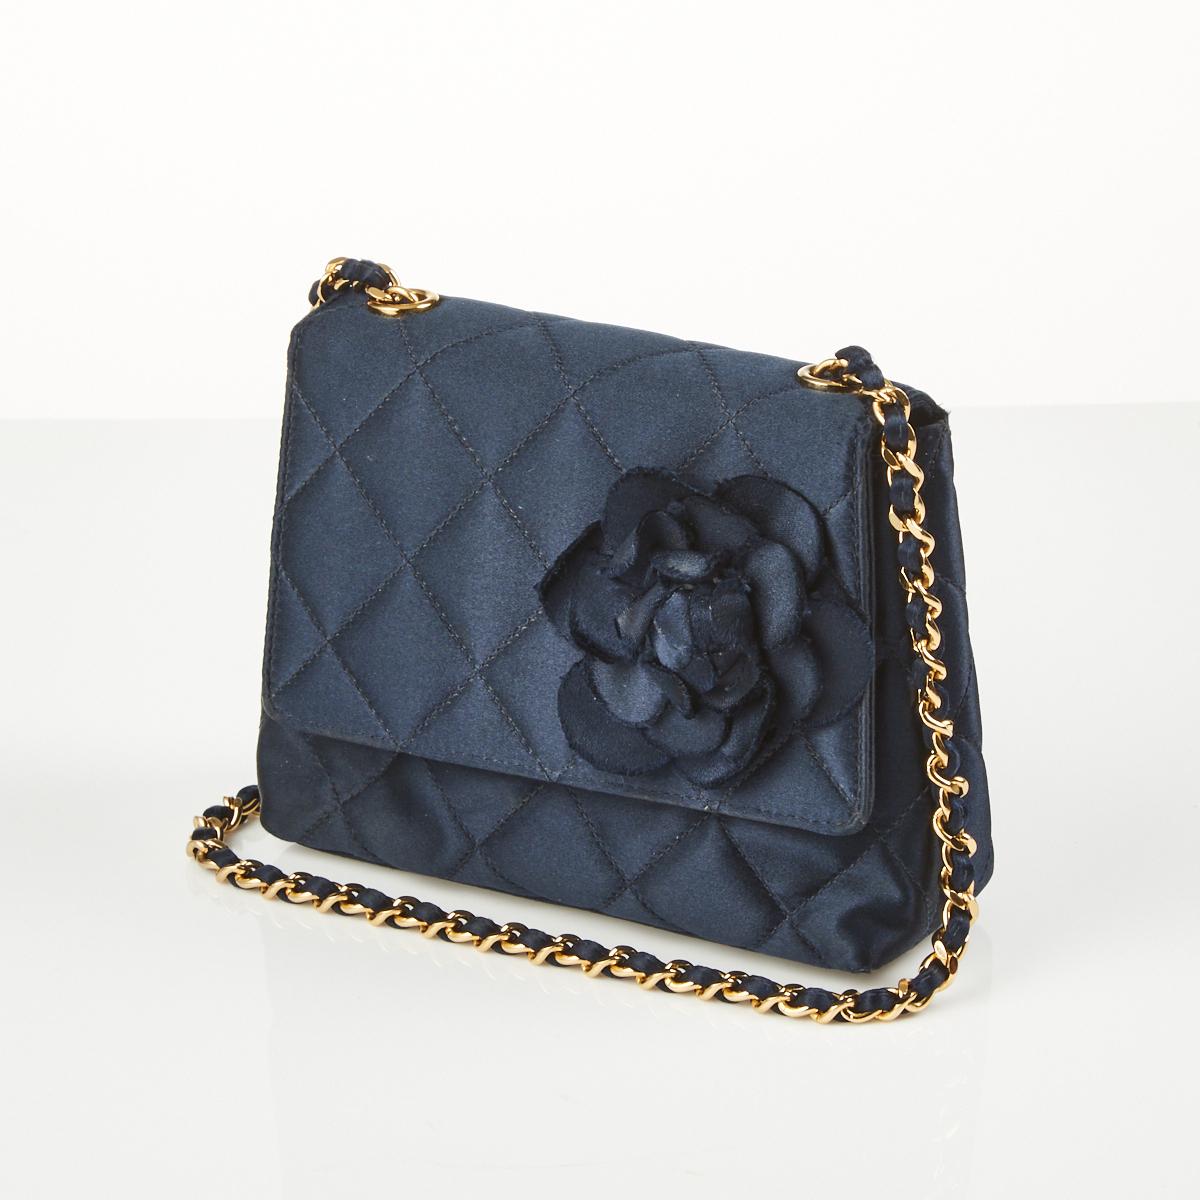 Chanel Quilted Satin Mini Square Camellia Bag